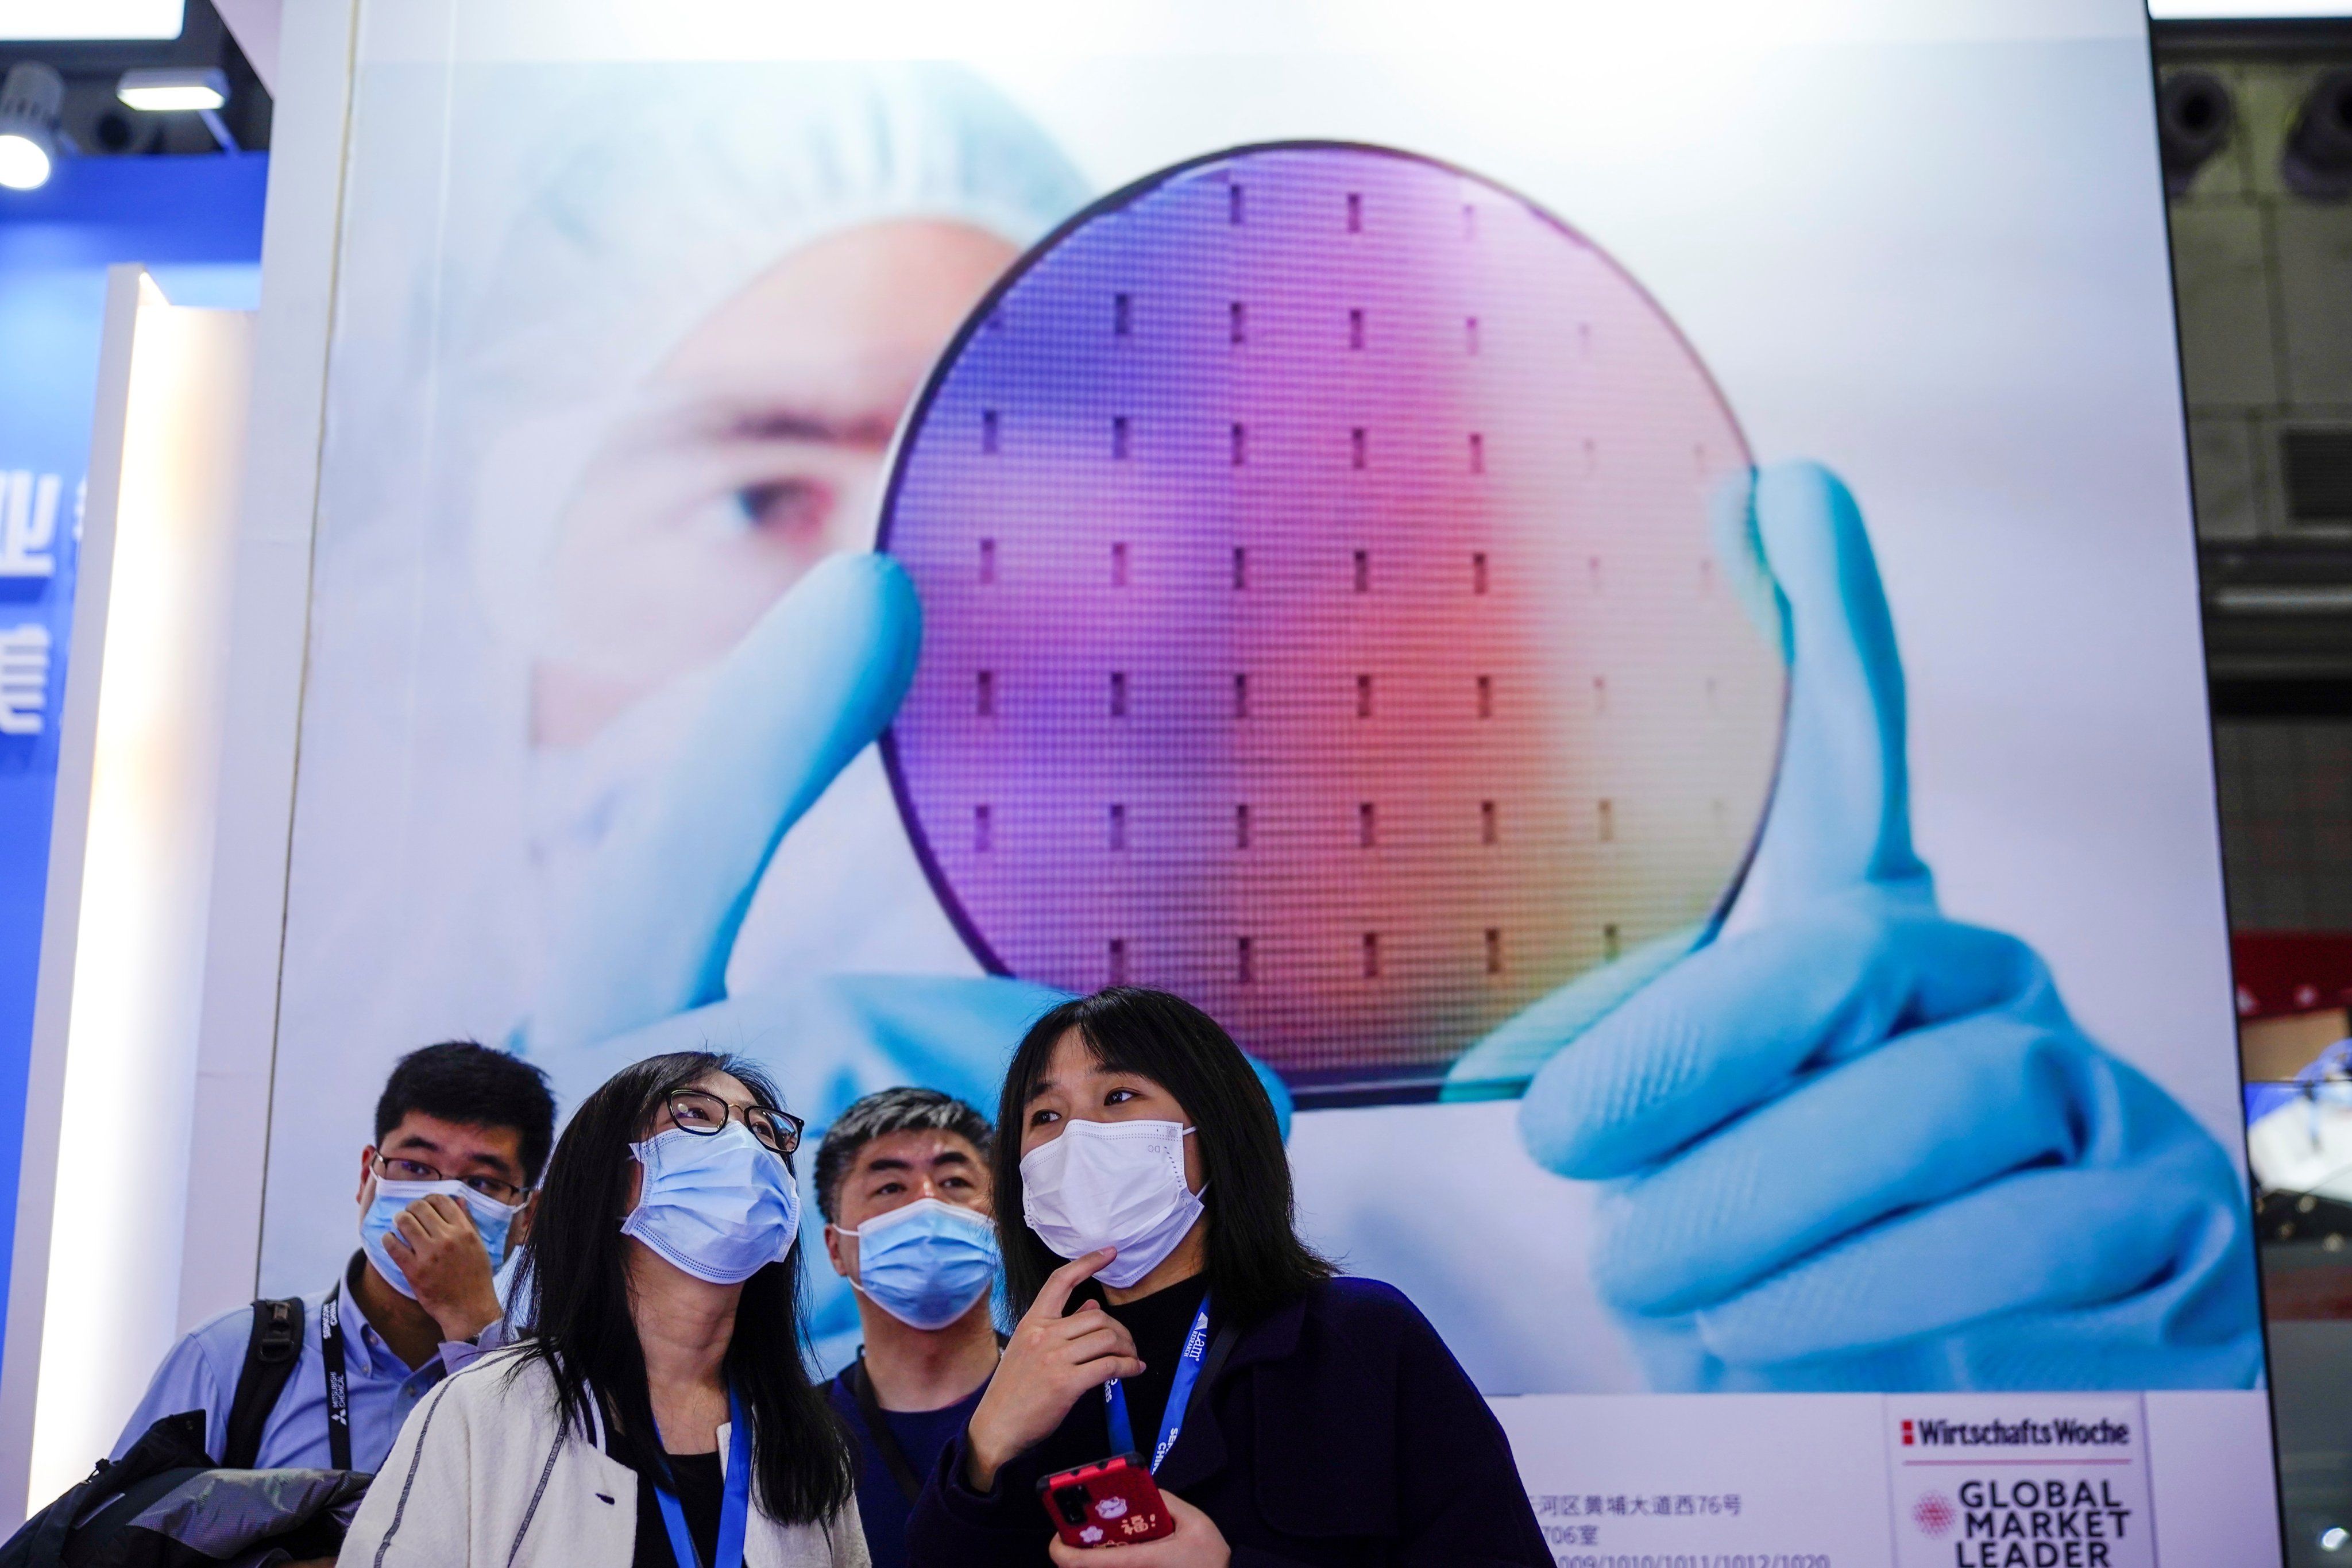 People visit a display at Semicon China, a trade fair for semiconductor technology, in Shanghai on March 17, 2021. Photo: Reuters